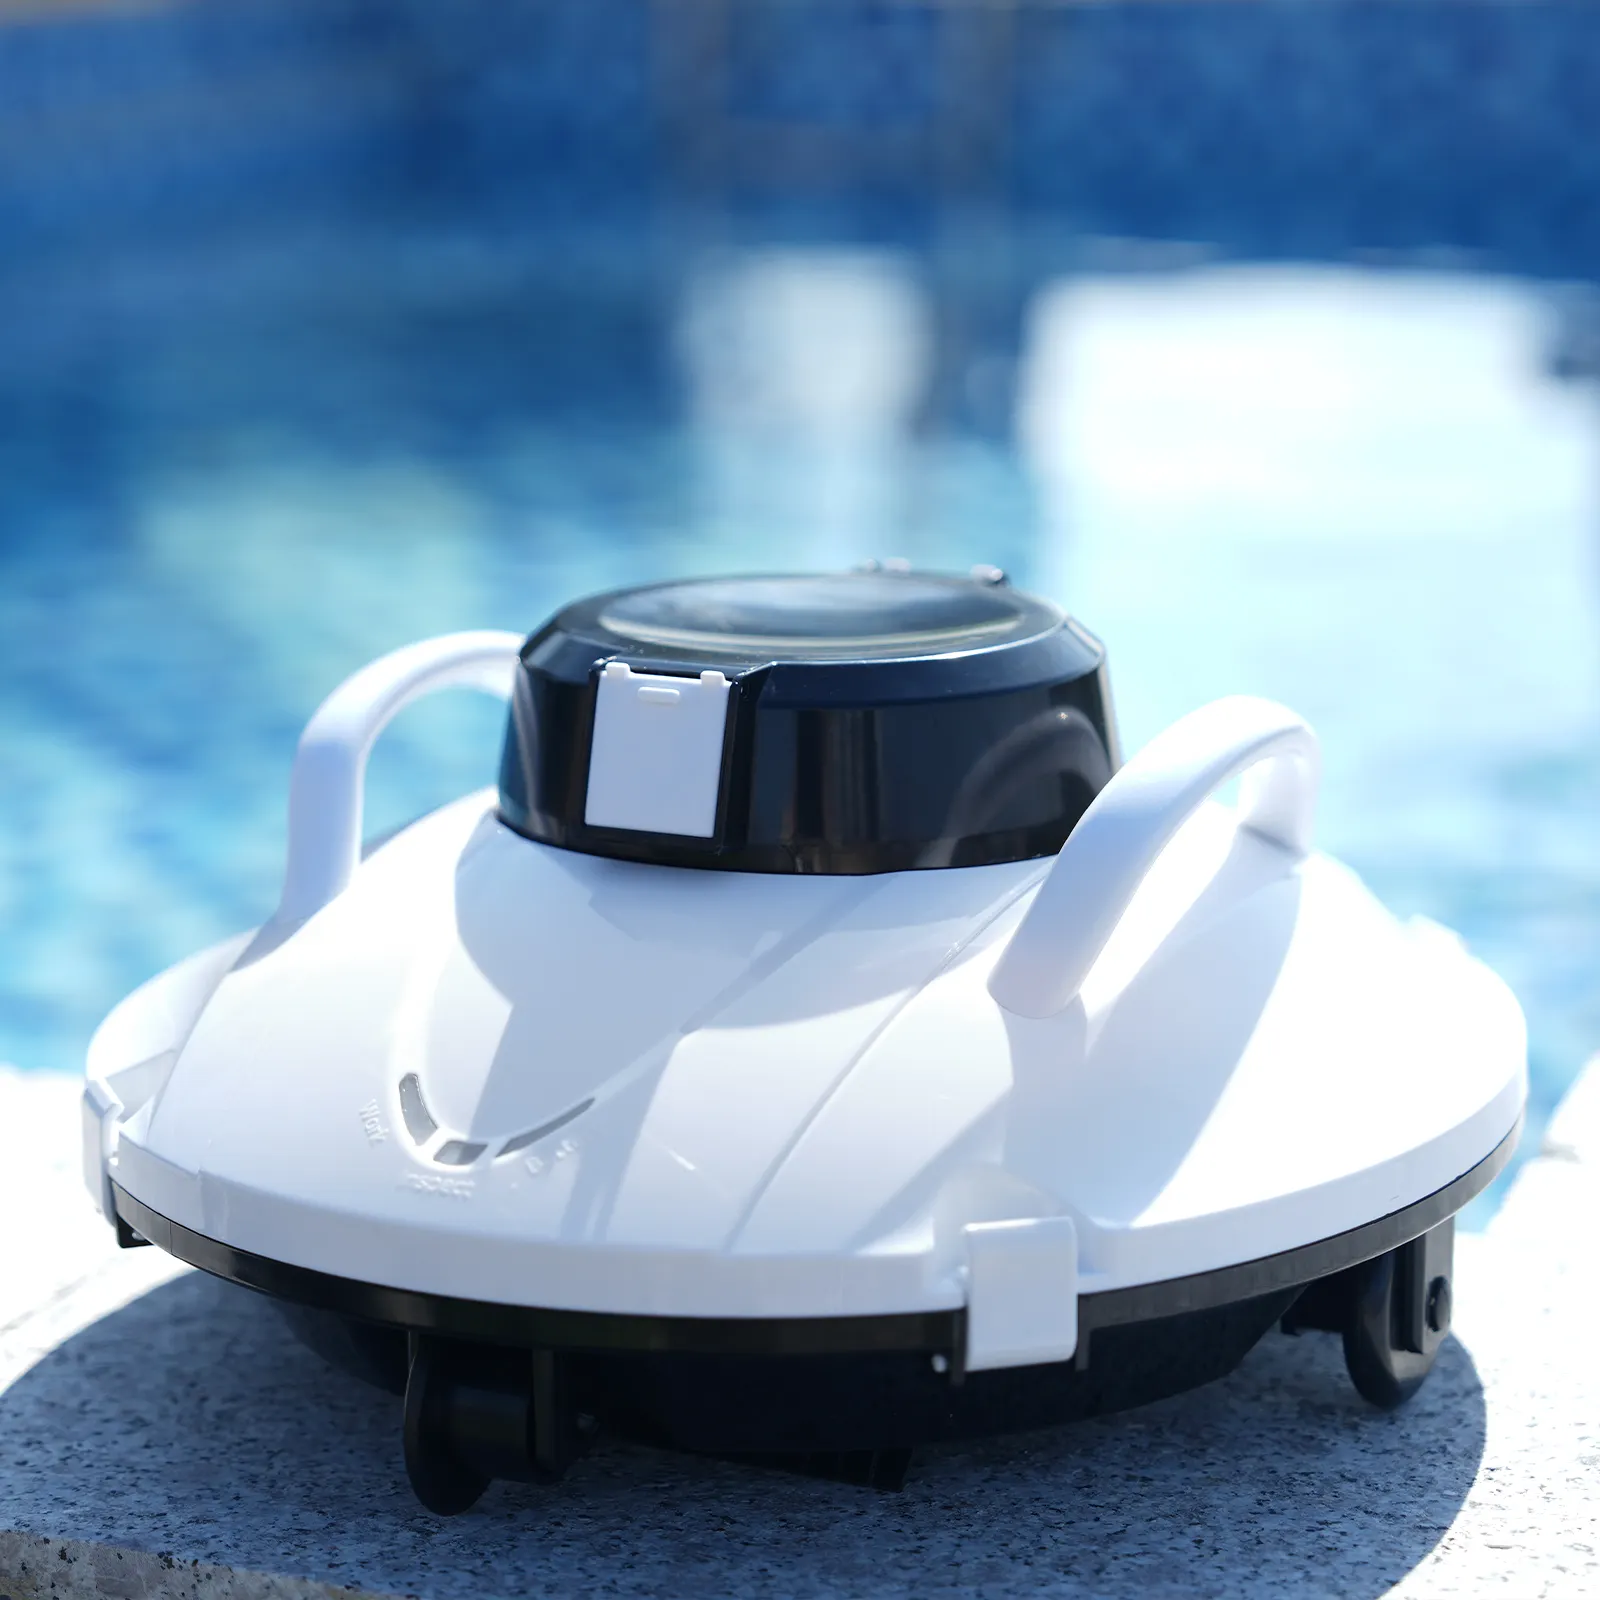 New Customizable Rechargeable Cordless New Swimming Pool Robot Of Vacuum Cleaner Flexible Dusting Cleaning